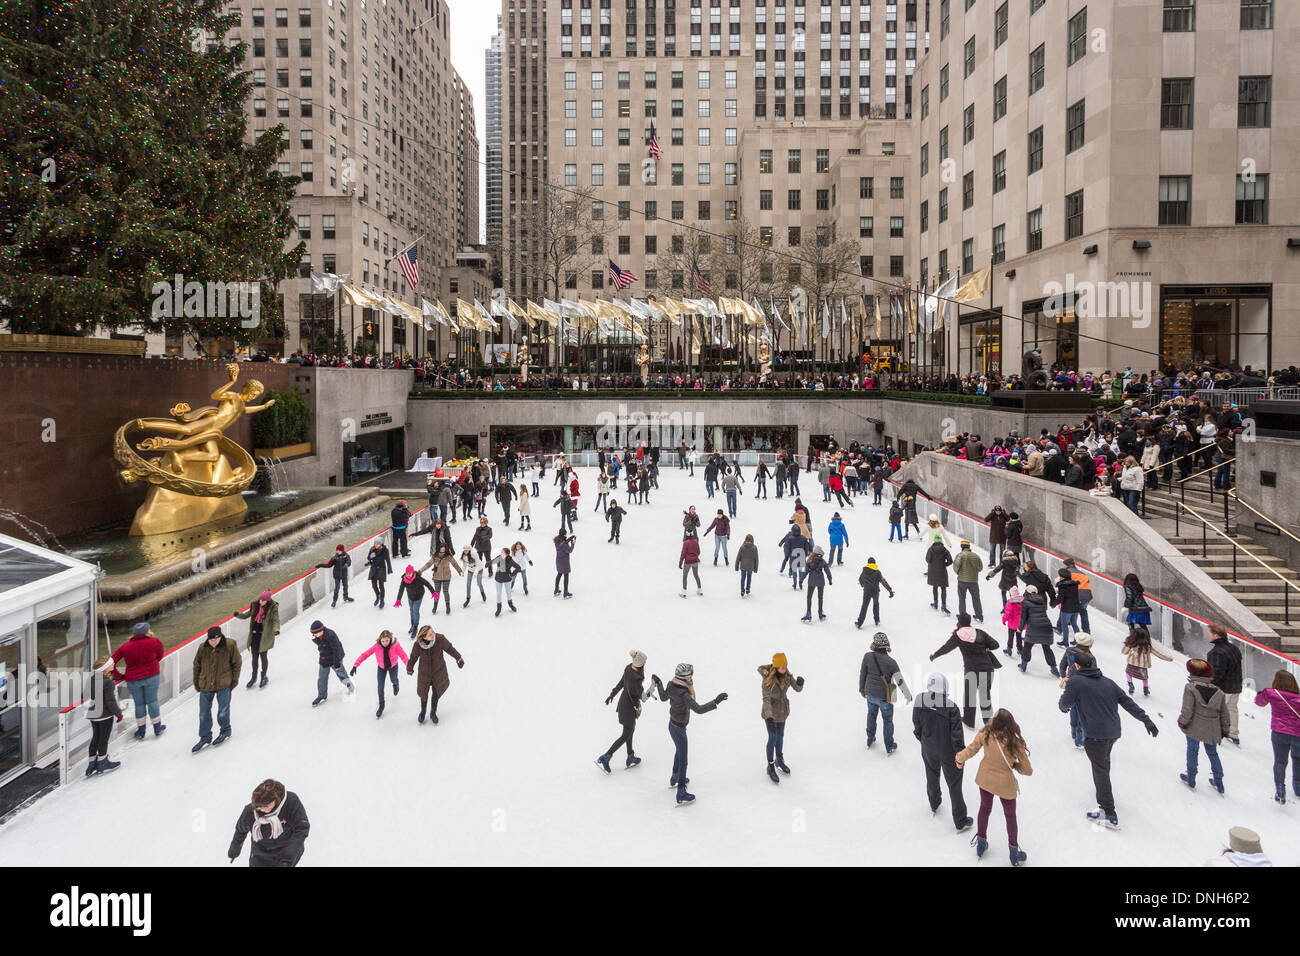 A crowd of ice skaters enjoying skating on the ice rink at The Concourse at the Rockefeller Center, New York, USA in winter Stock Photo